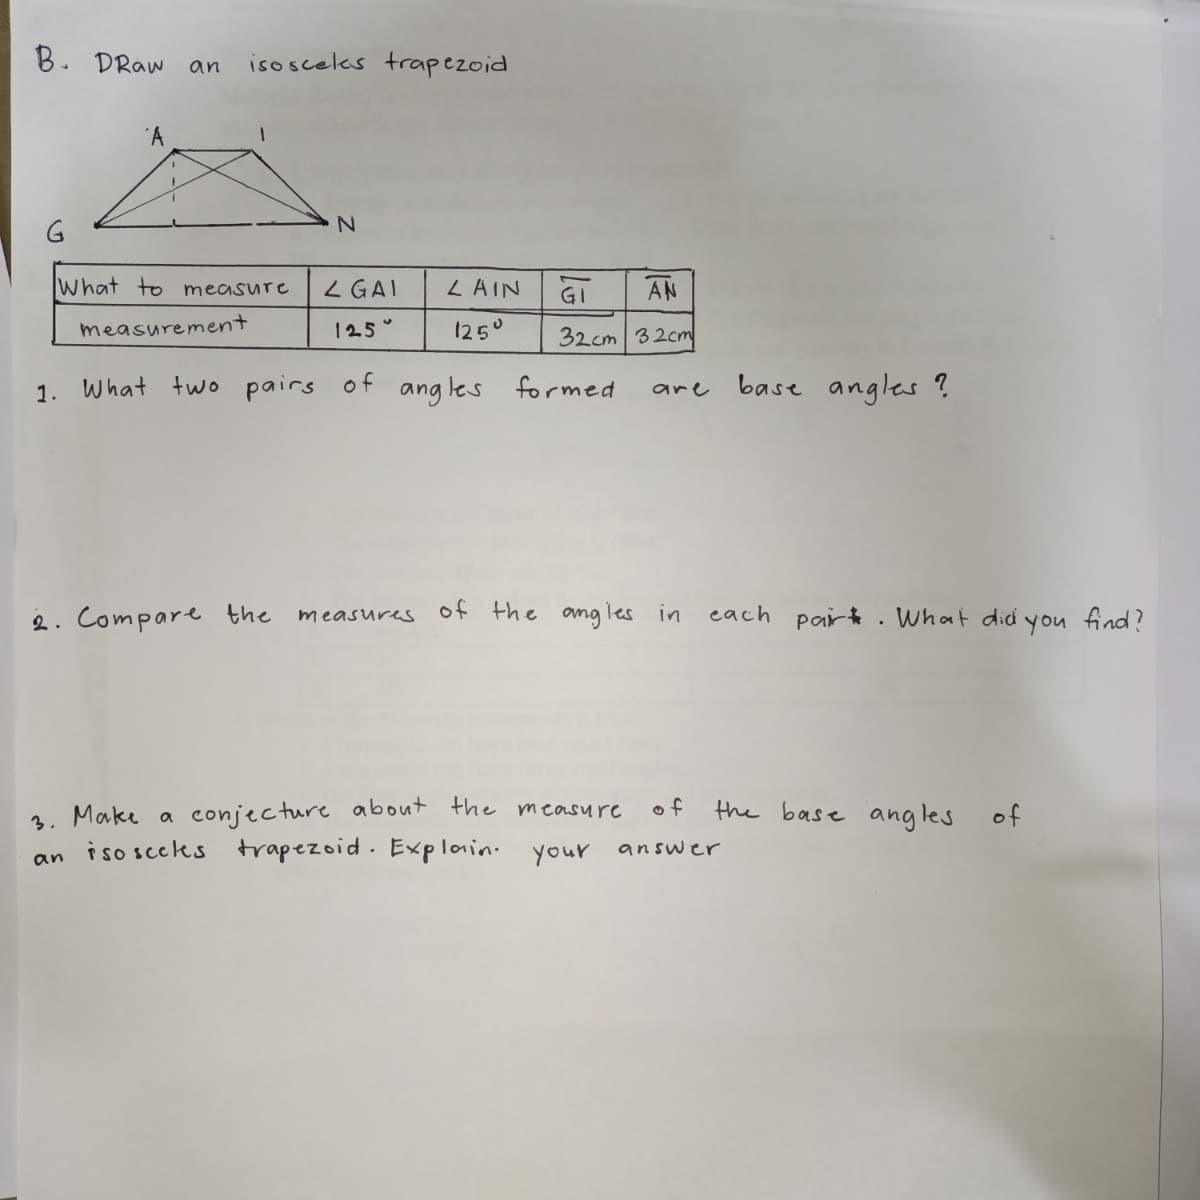 B. DRaw
isosceles trapezoid
an
G
What to measure
L GAI
LAIN
GI
AN
measurement
125°
125°
32cm 32cm
What two pairs
of
ang les formed
base angles ?
1.
are
2. Compare the
of the angles in
each par . What did
find?
measures
you
3. Make a conjecture about the measure
an iso sceks trapezoid. Explain. your
of
the base angles of
answer
